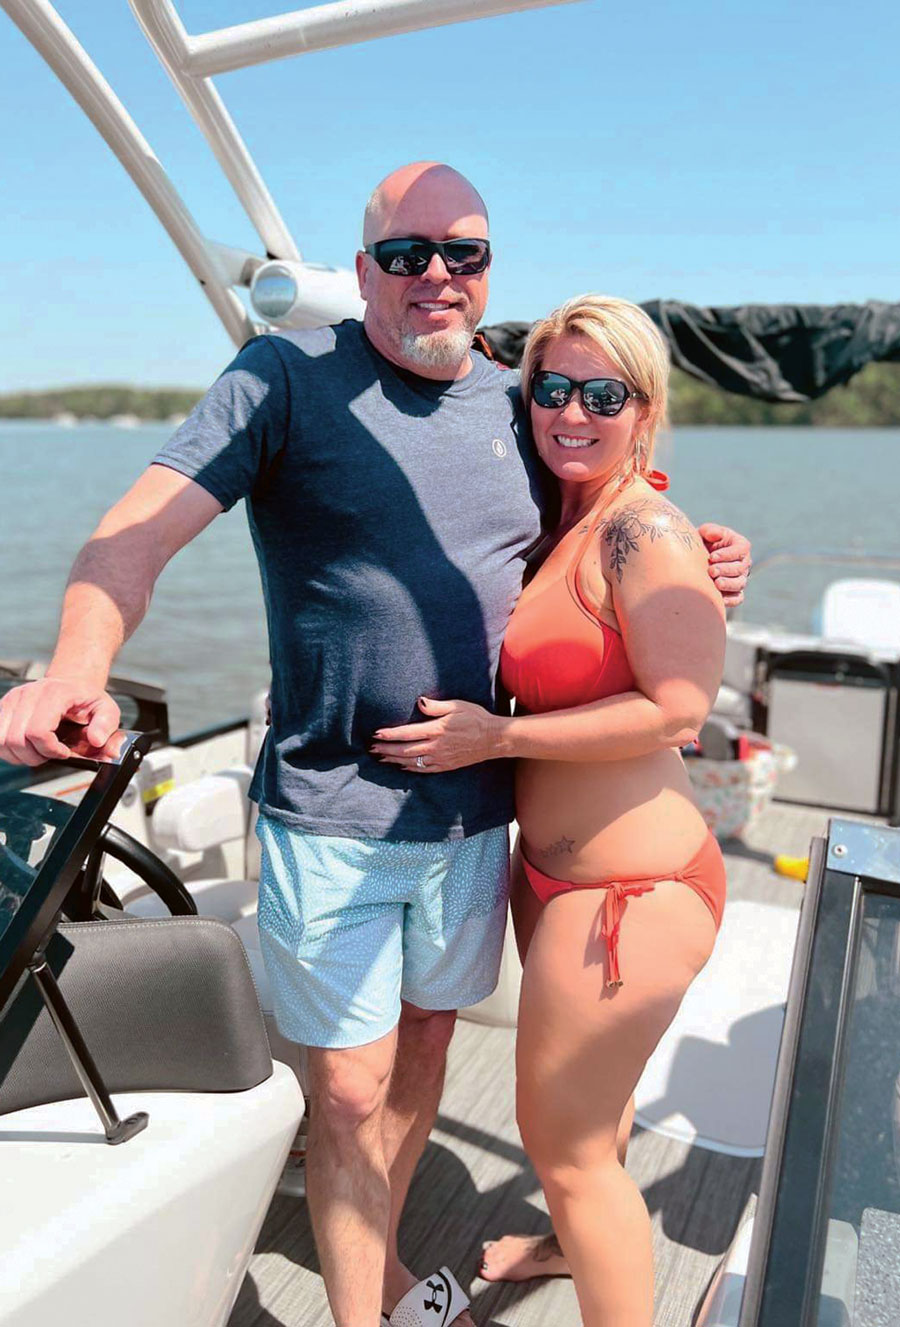 Gary Mashburn and his wife on their boat